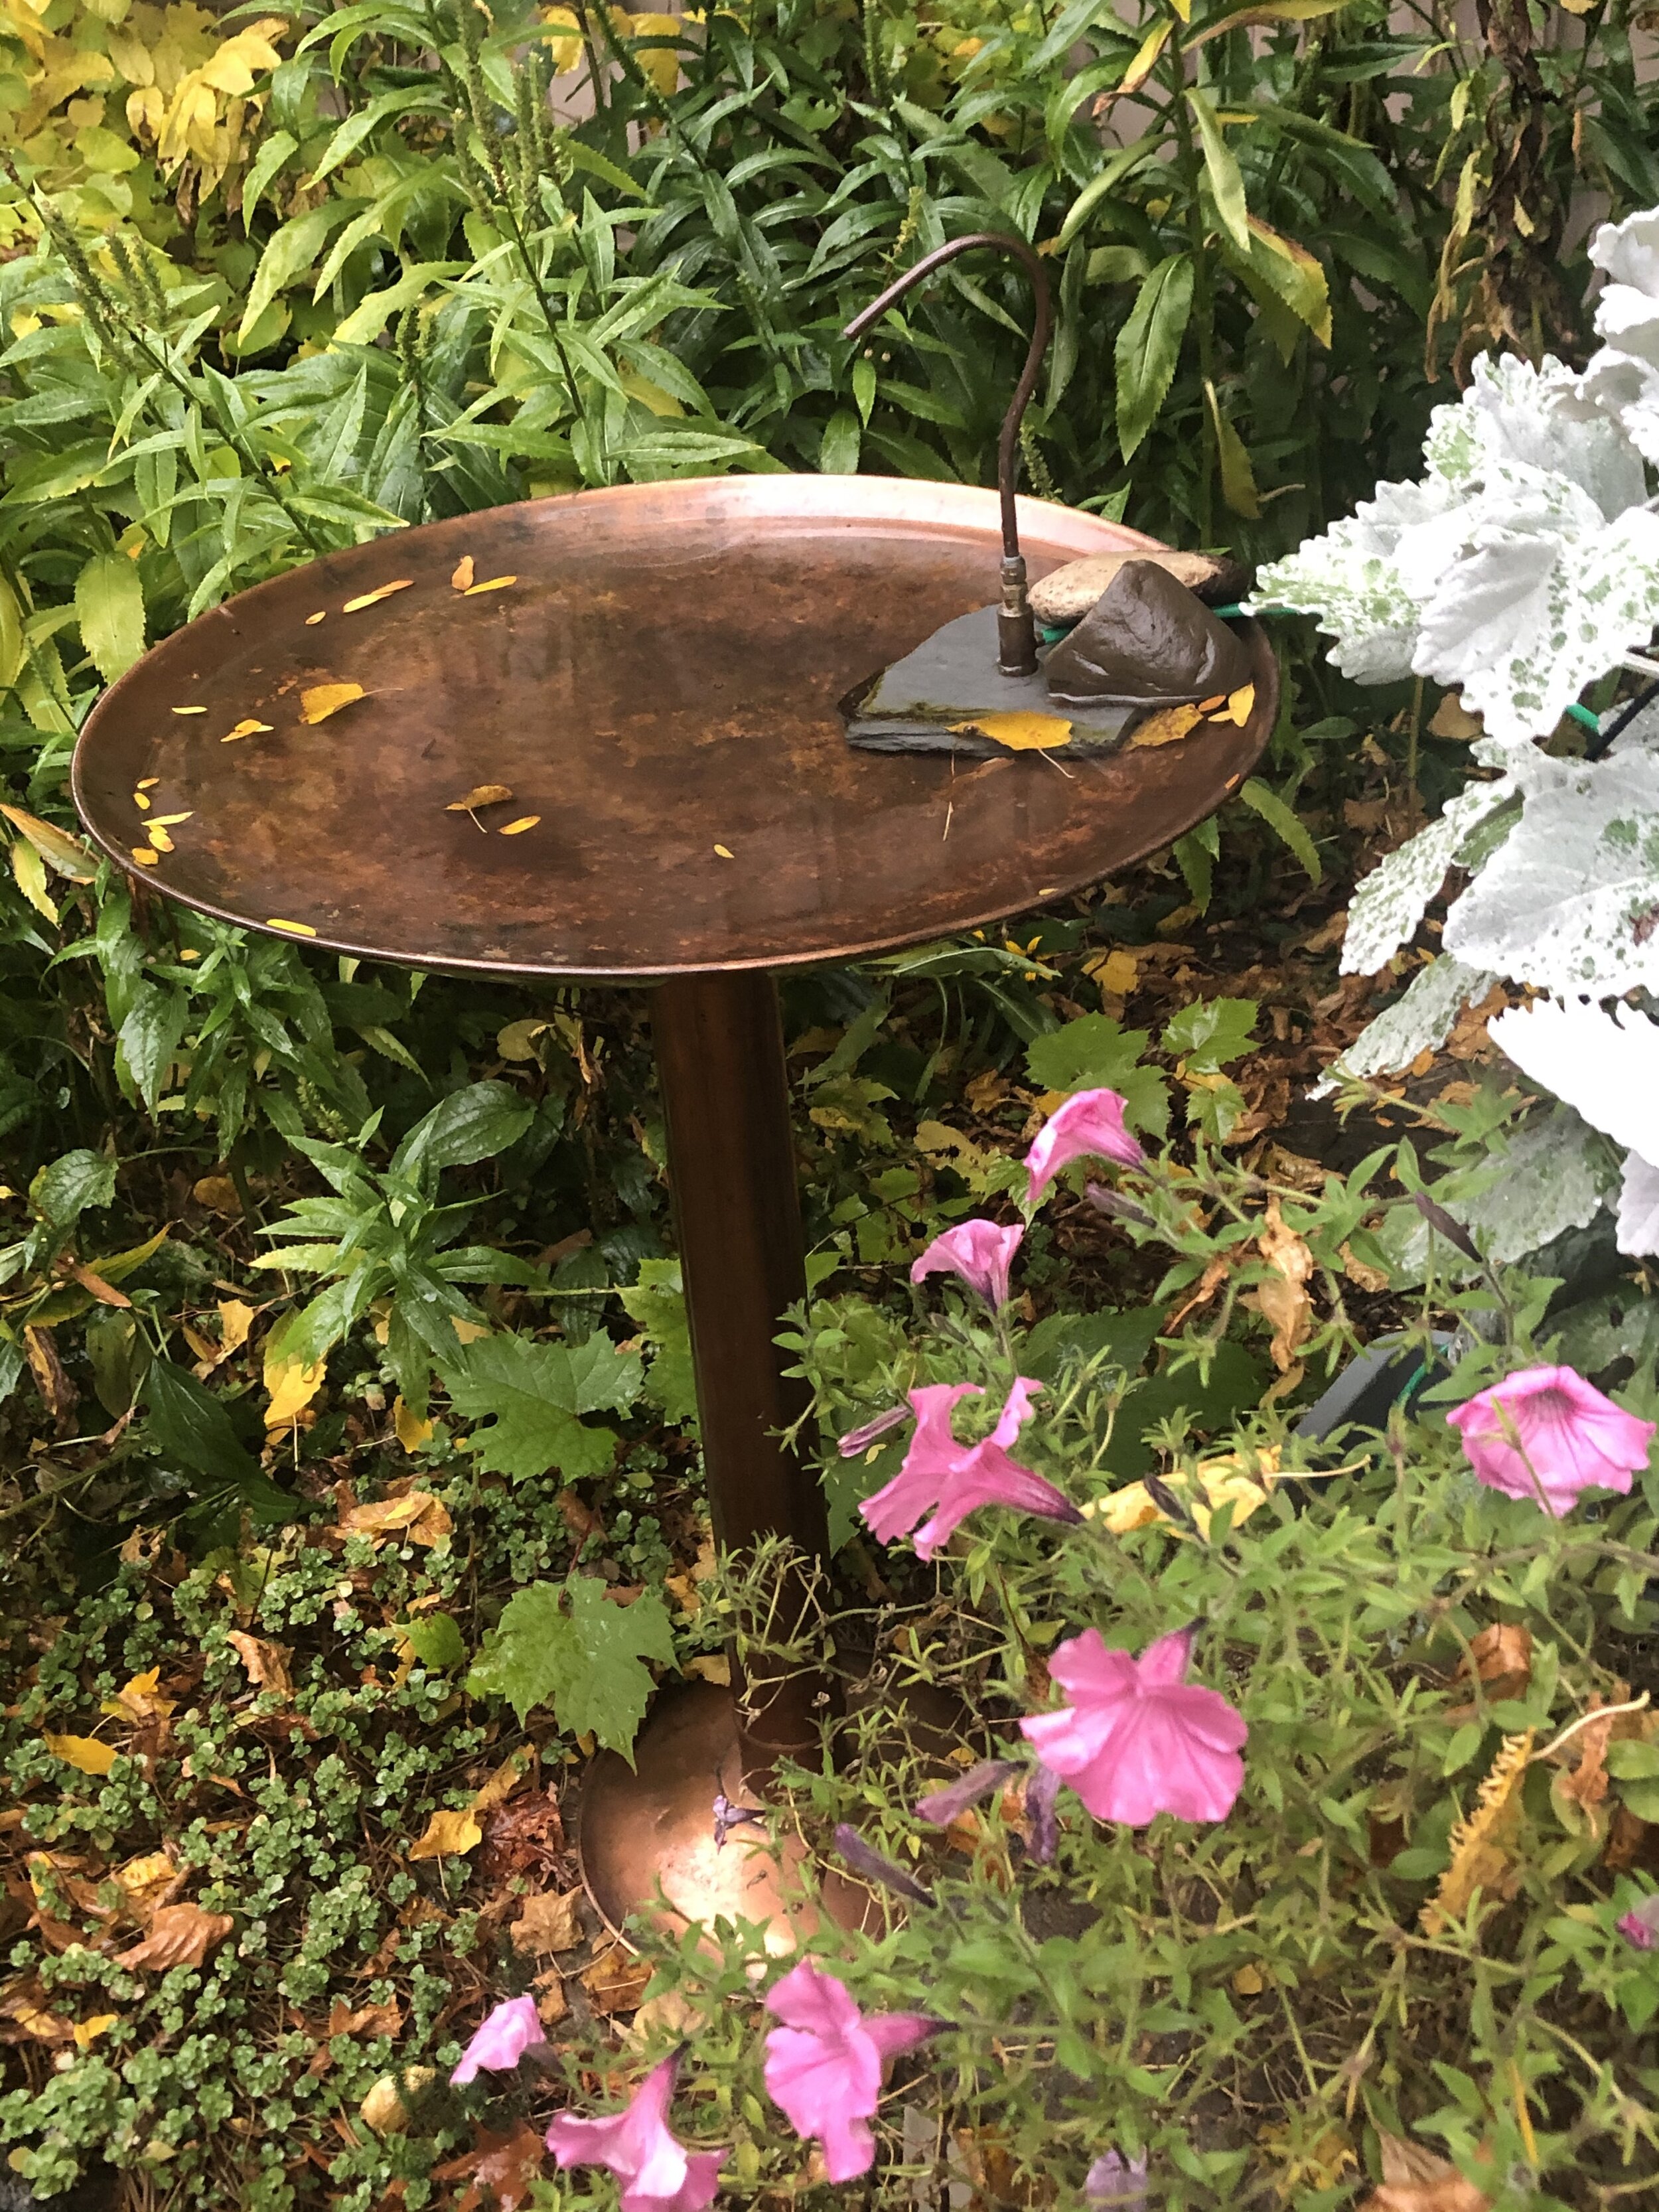 This lovely copper bird bath was found on Kijijiji as well as the copper dripper that was turned into a solar fountain to create moving water and attract birds. Both the bird bath and the dripper were purchased for pennies on the dollar.